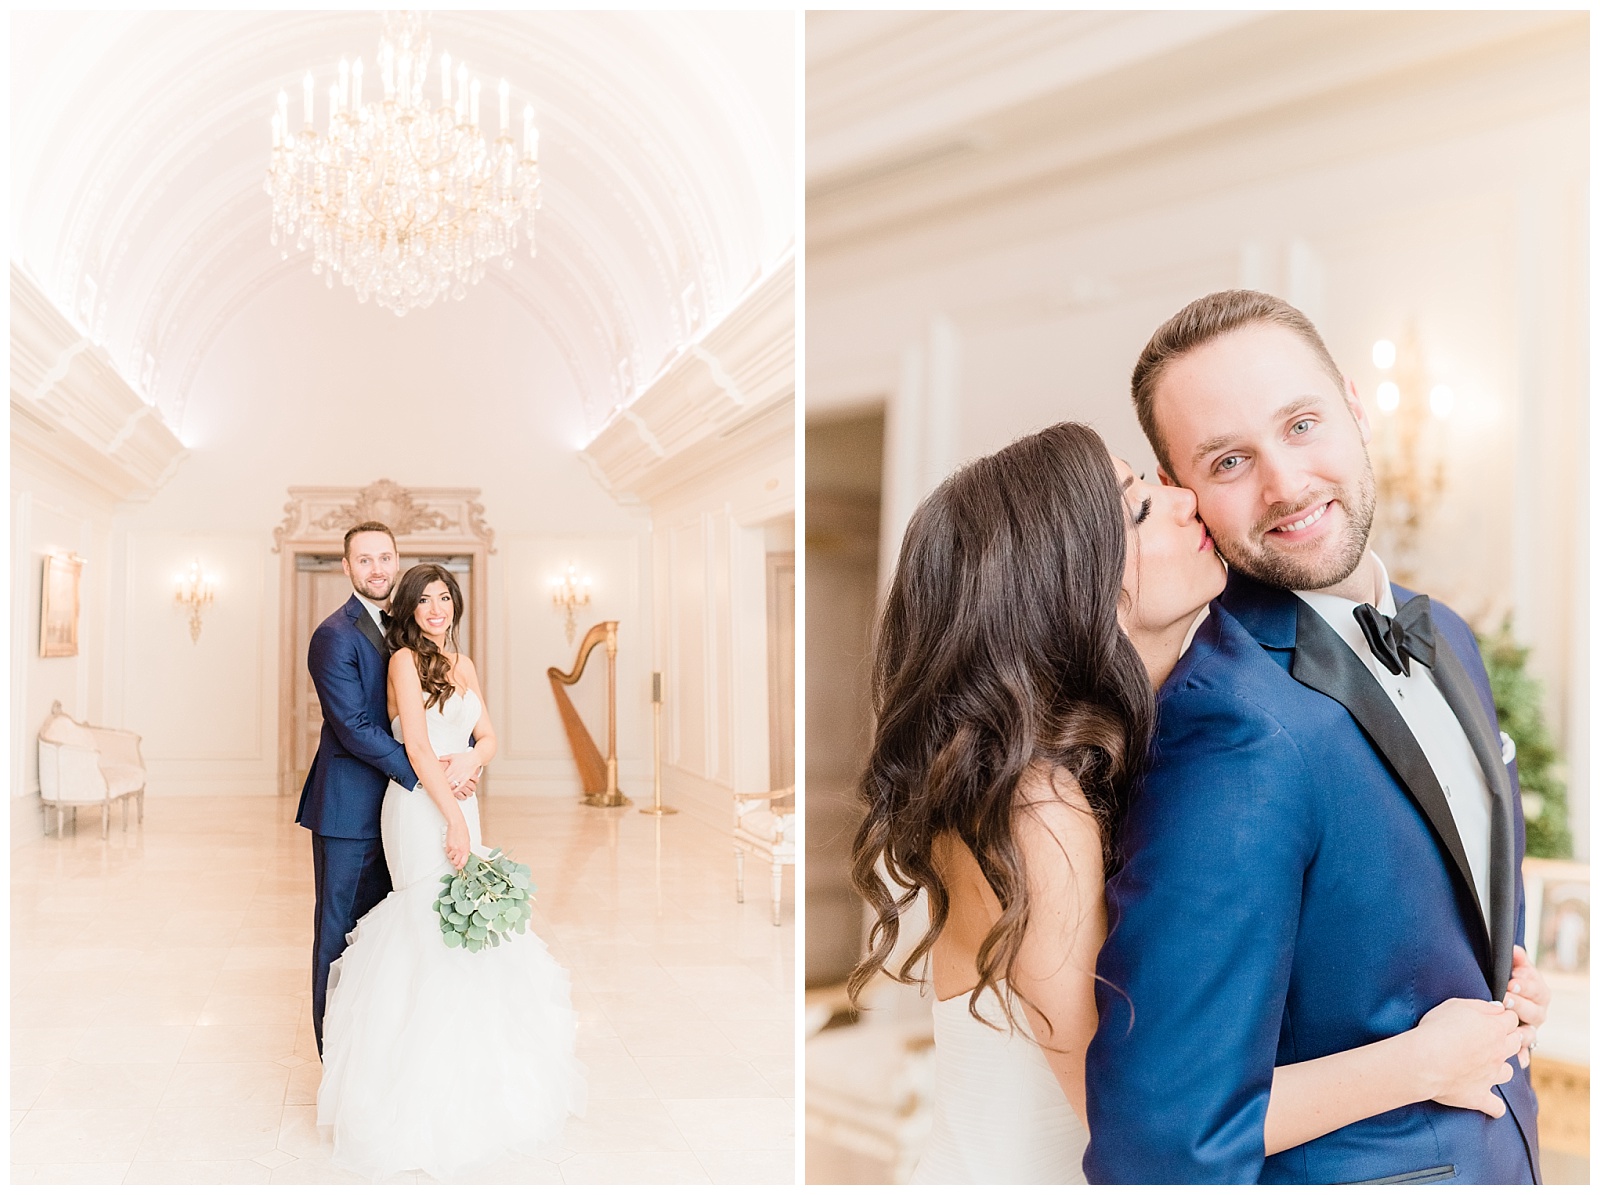 Park Chateau Wedding, Photographer, New Jersey, NJ, Winter, Bride and Groom Portraits, Light and Airy, Luxury Wedding